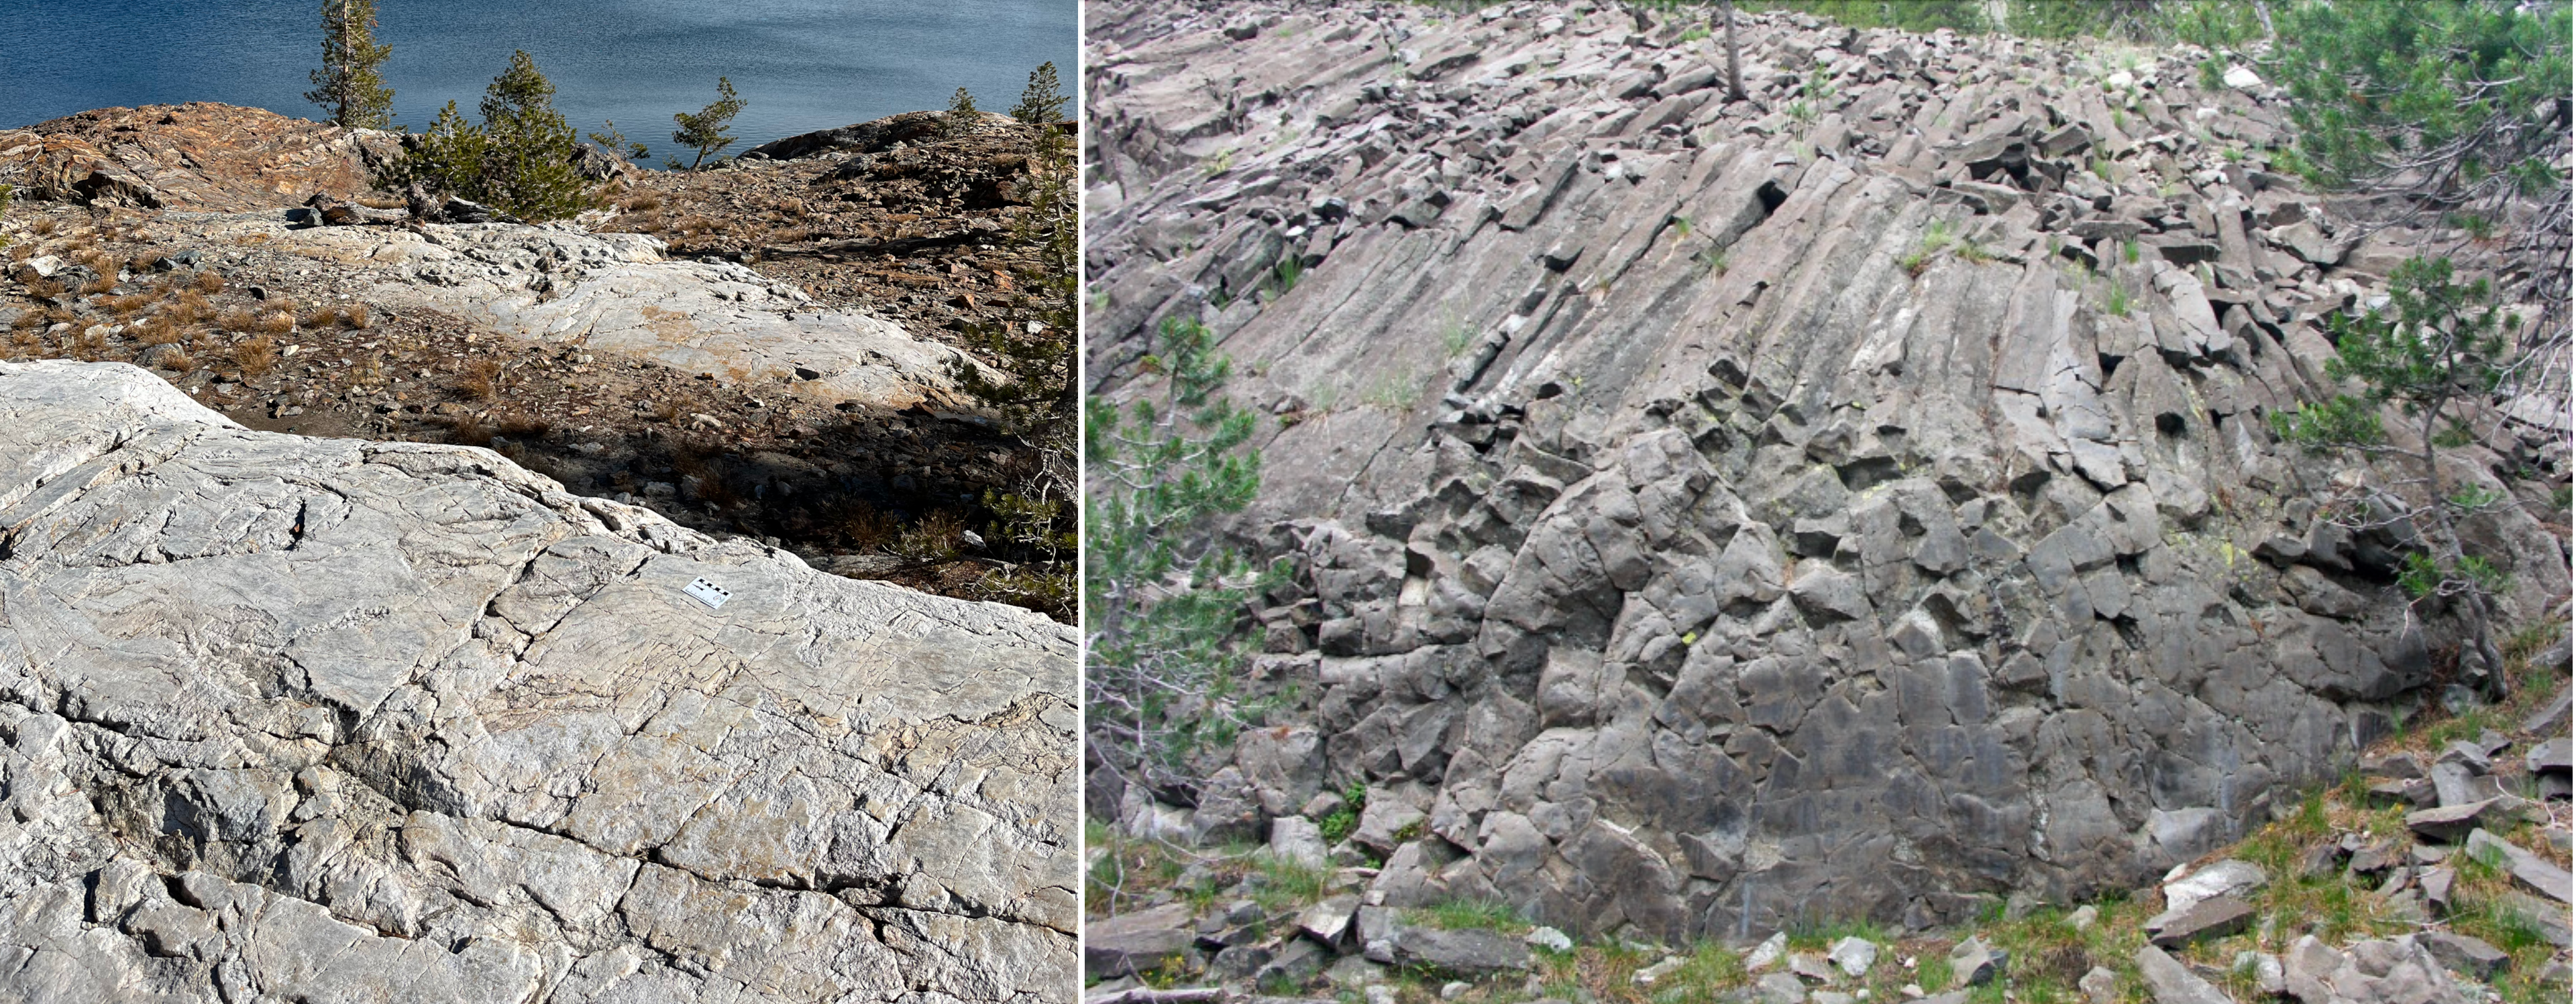 Two photos, with one showing glacially polished light rock and the other showing columnar-jointed andesite